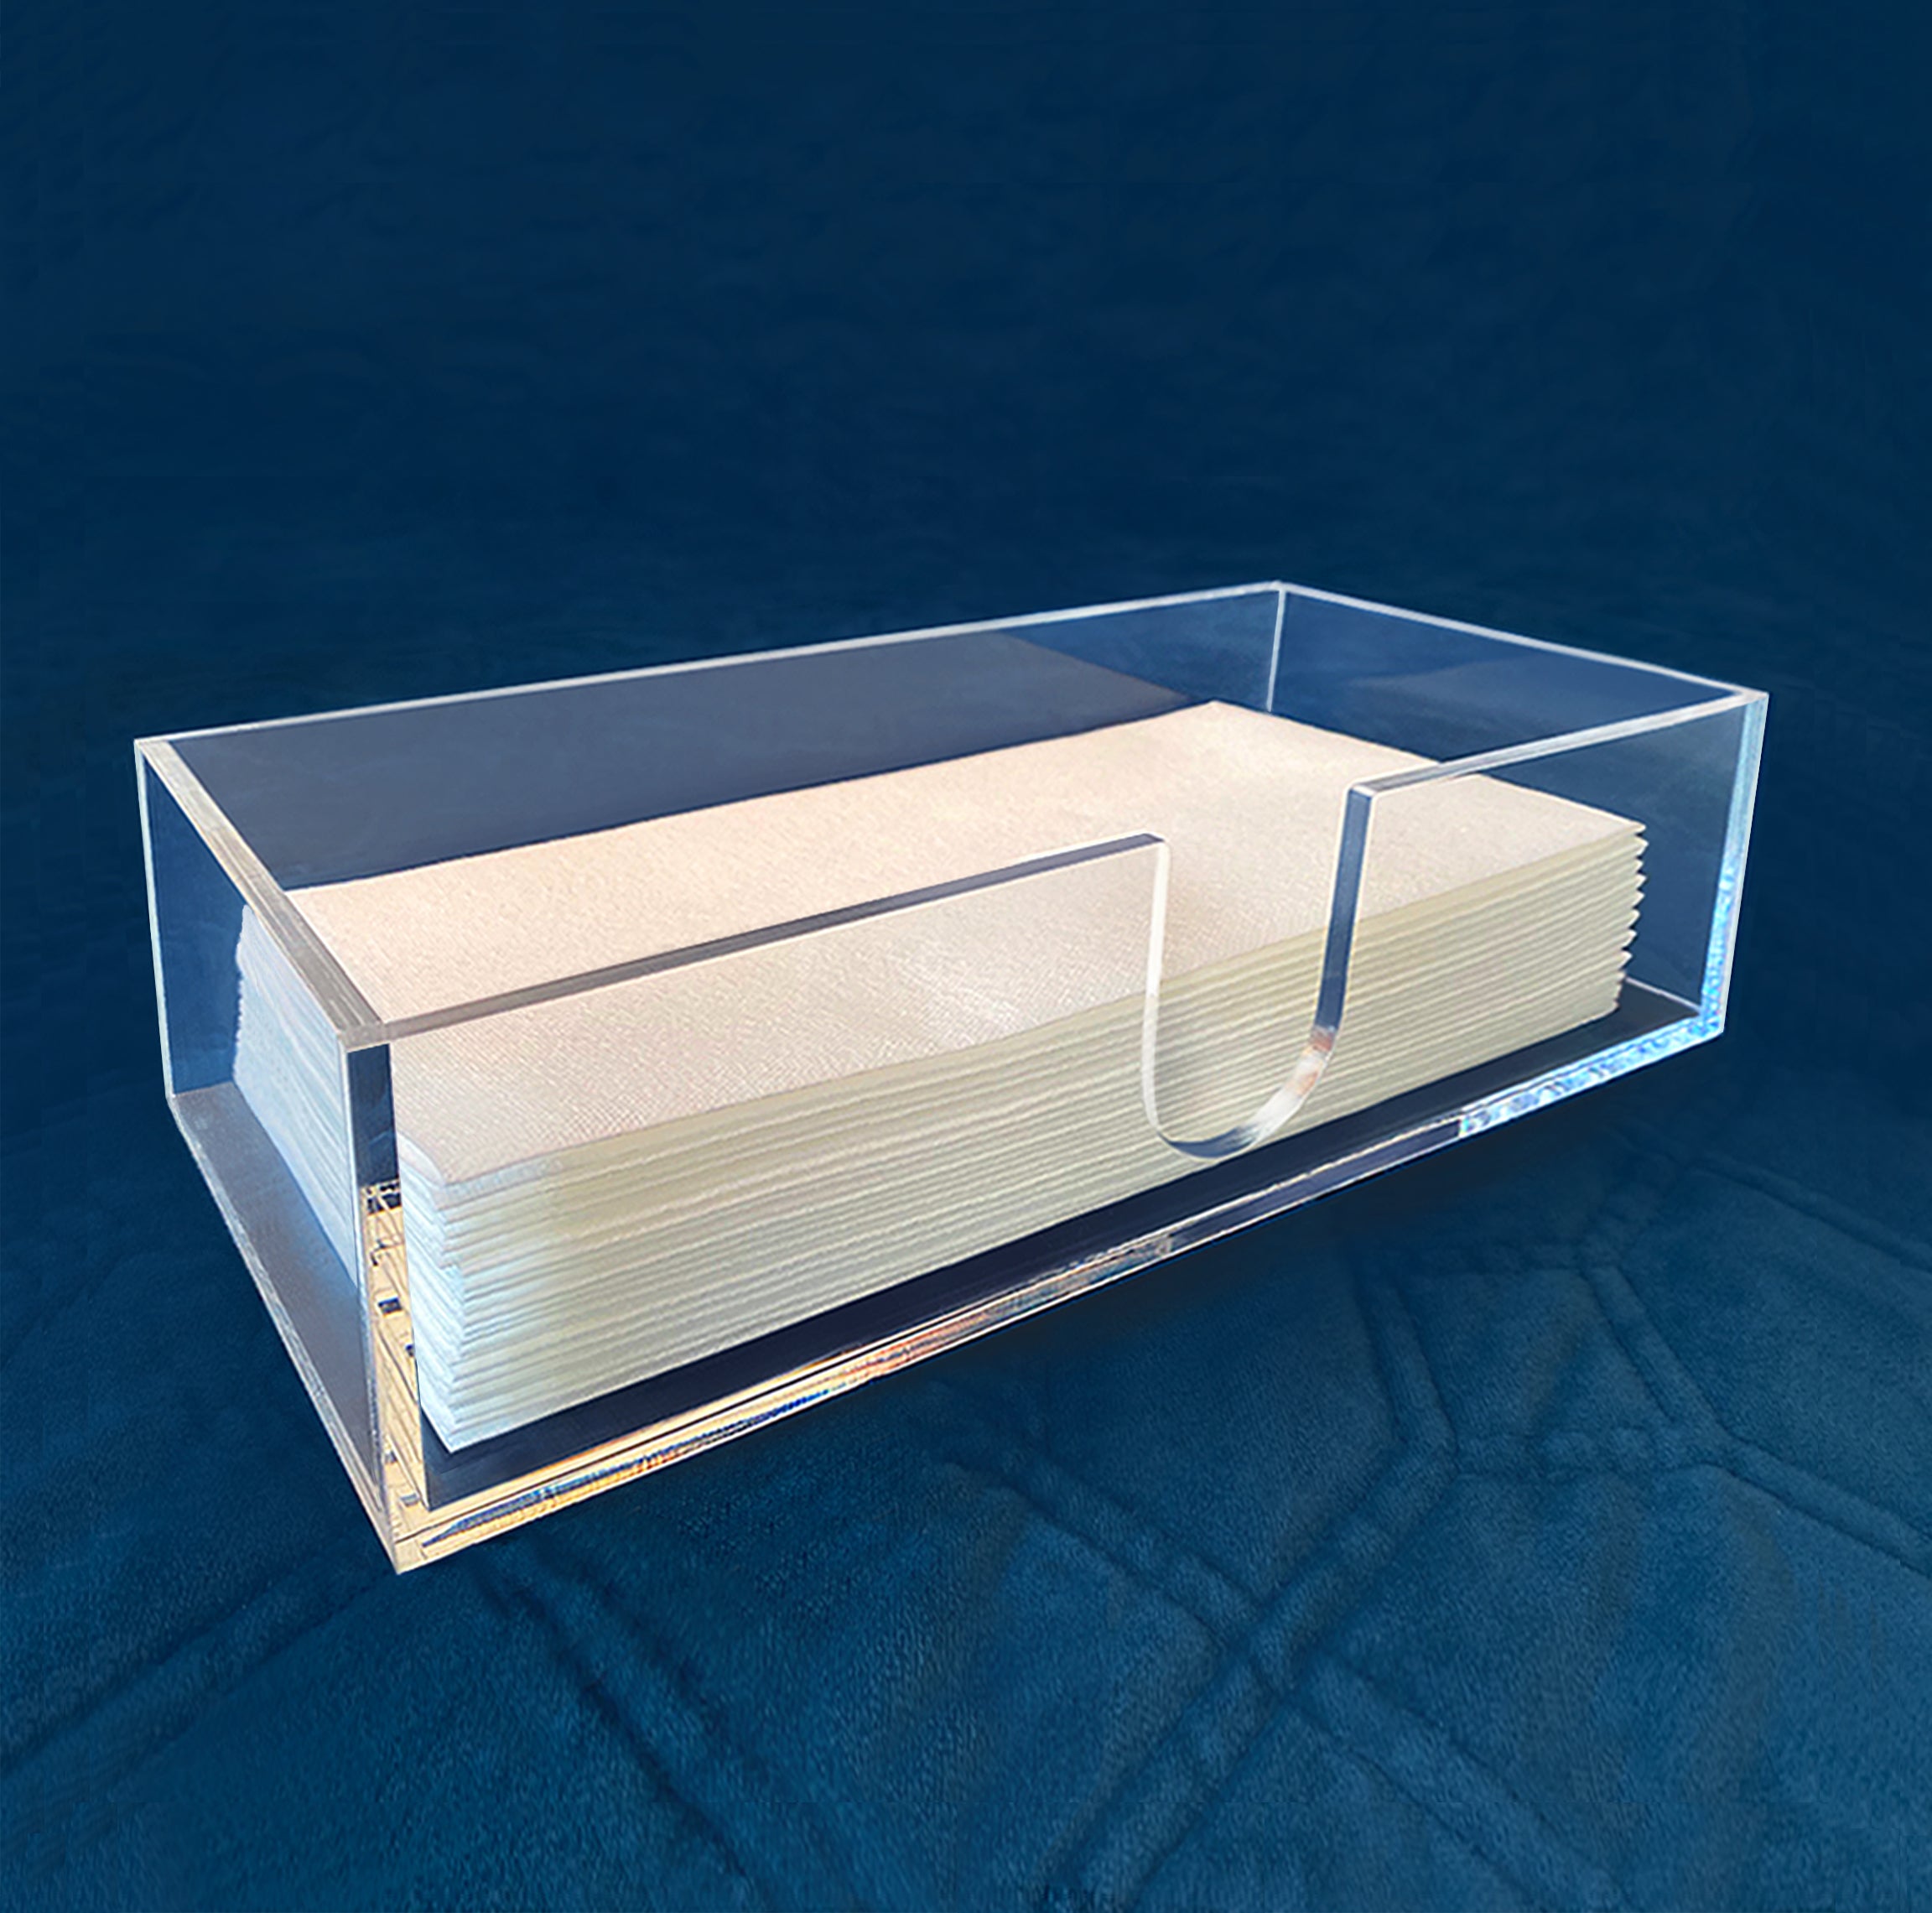 Transparent Paper Towel Holder Countertop Acrylic Tissue Stand